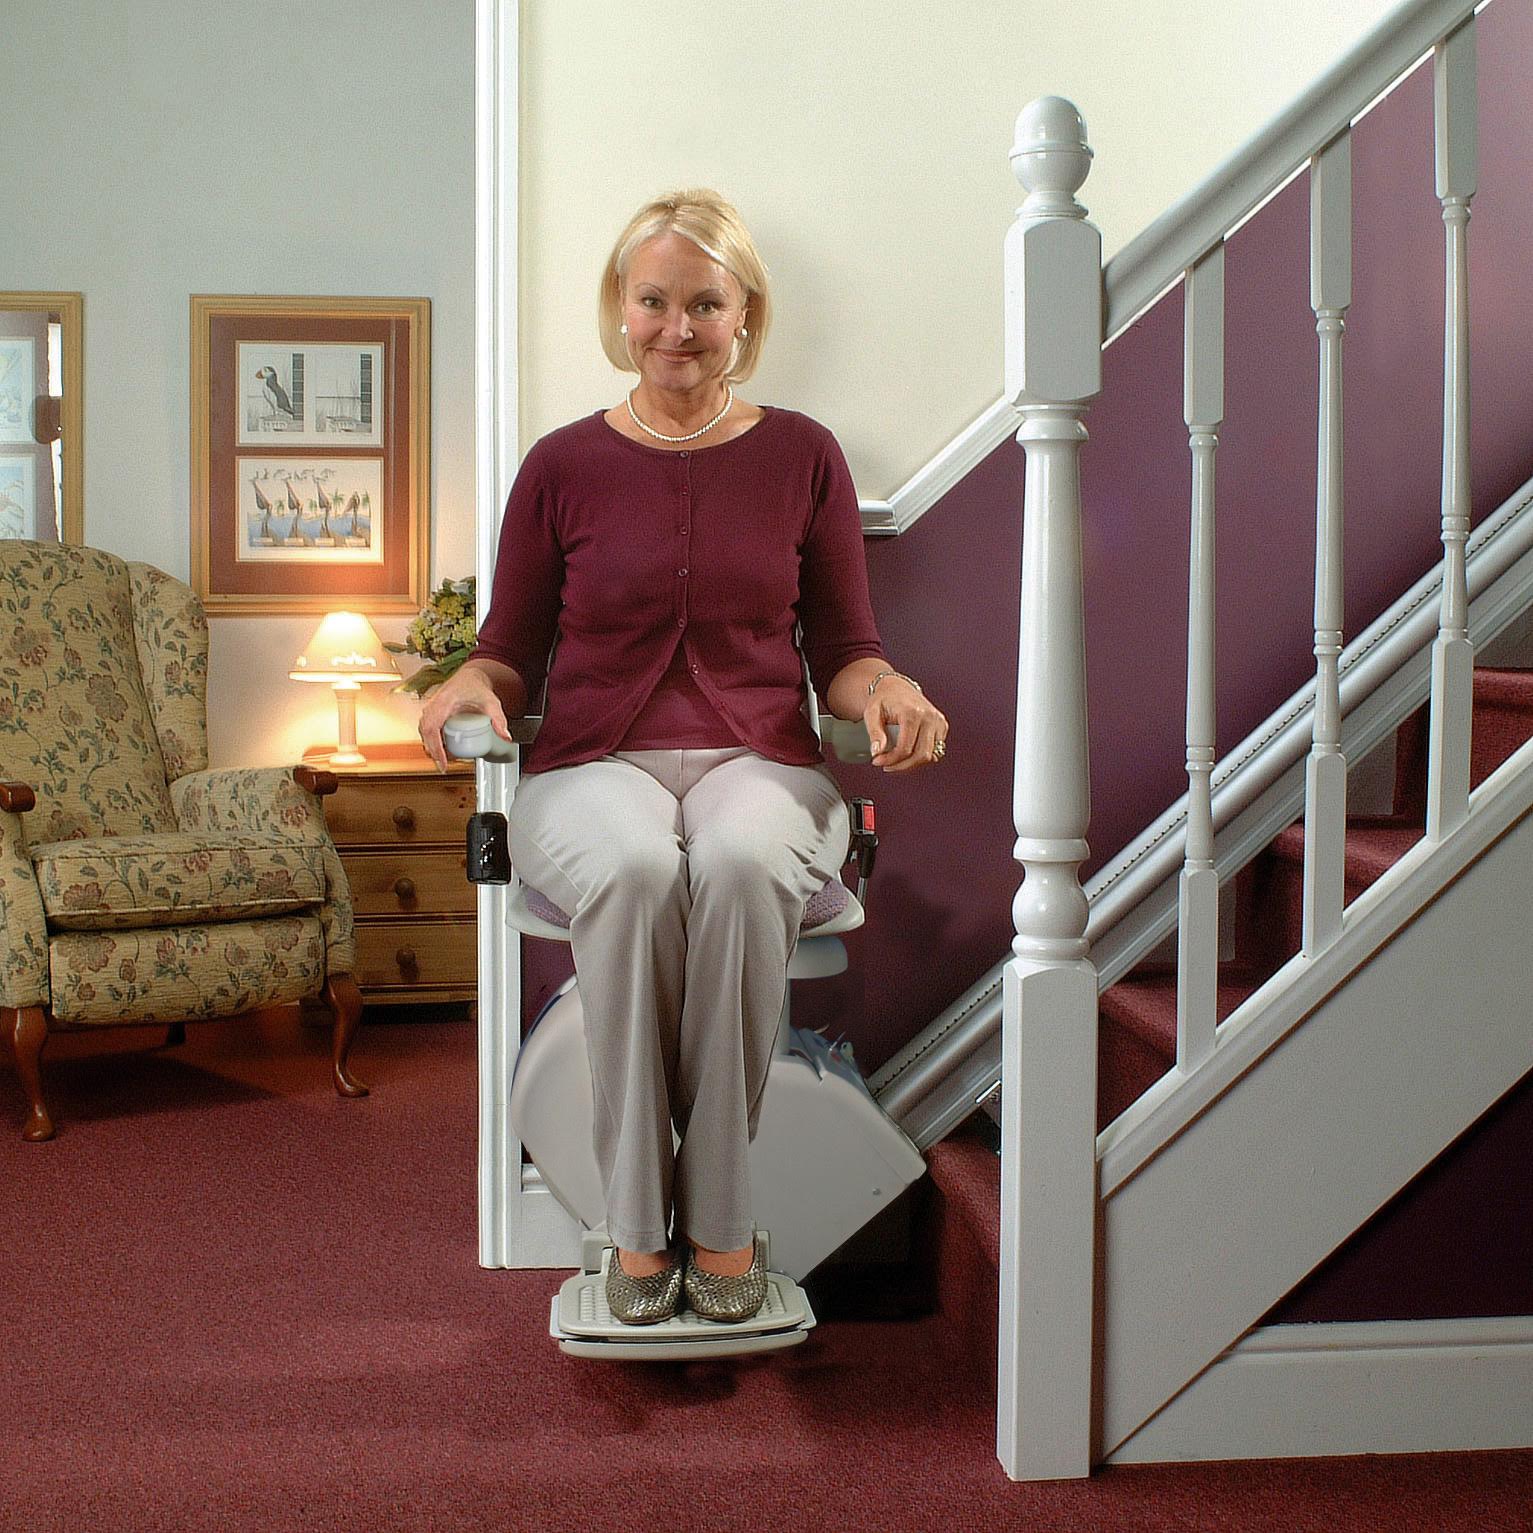 Customer Reviews Ratings Consumer Reports Stair Lift are home residential indoor stairway staircase glides